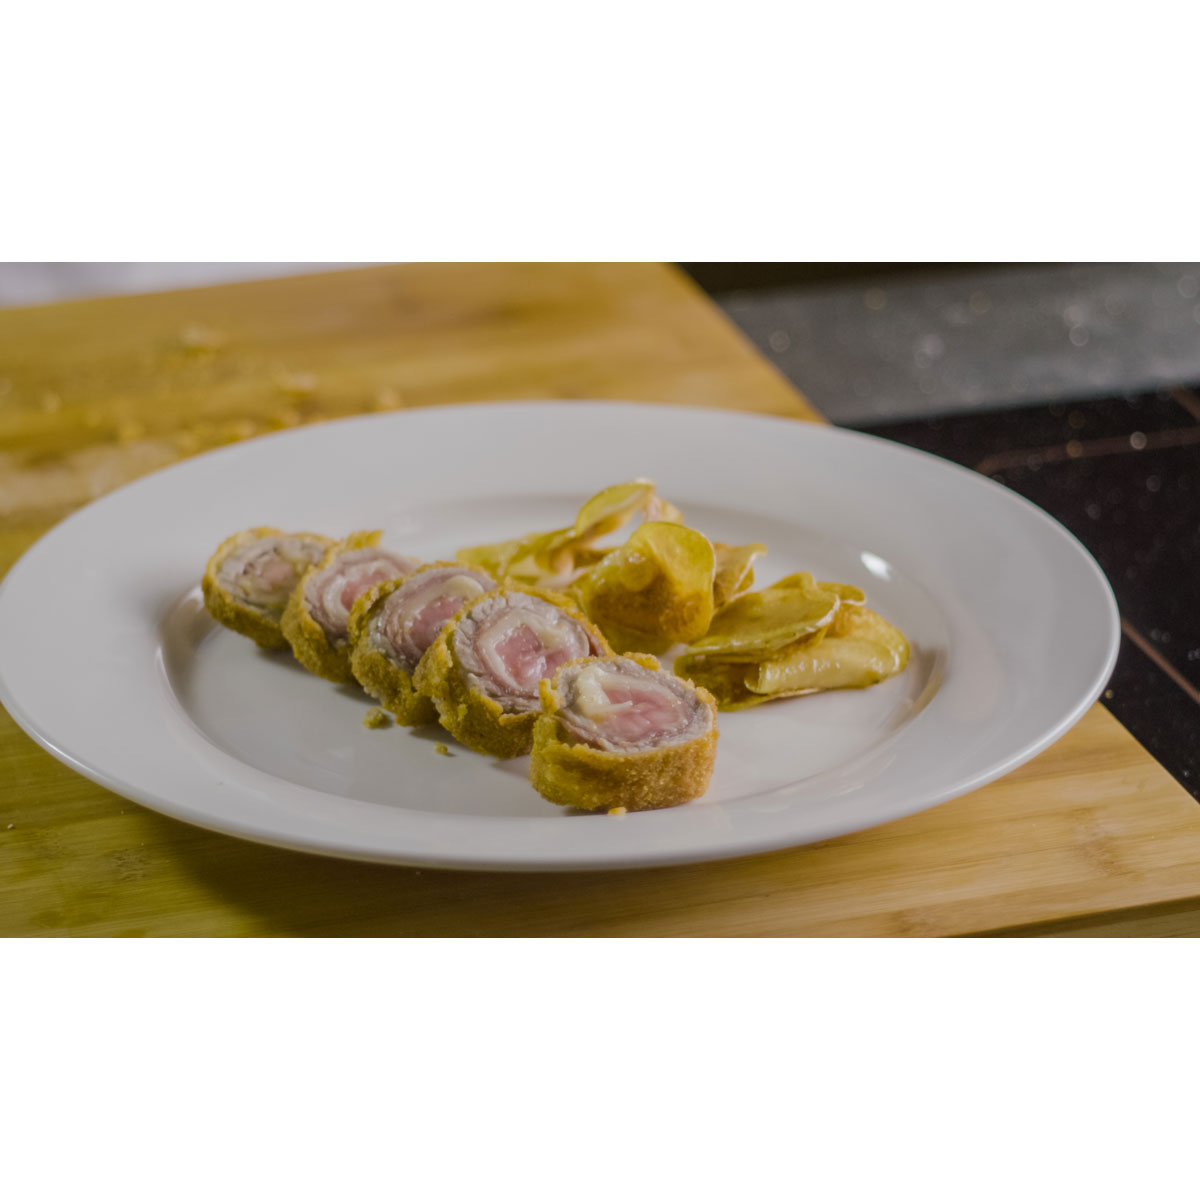 Veal parcels with prosciutto crudo, Grana Padano shavings and potato chips